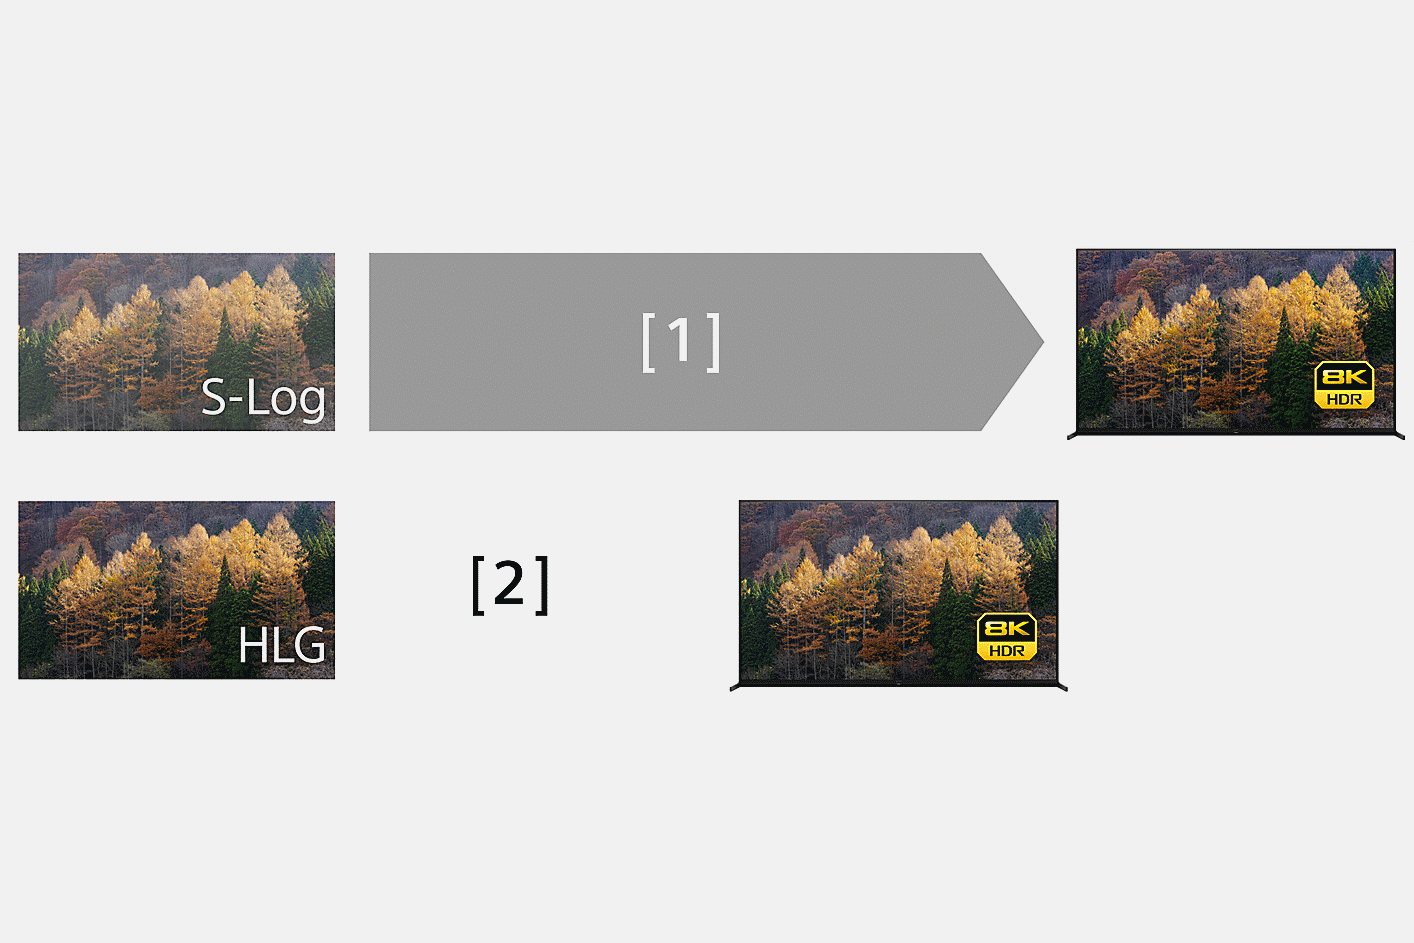 Two images with longer and shorter arrows indicating different production times